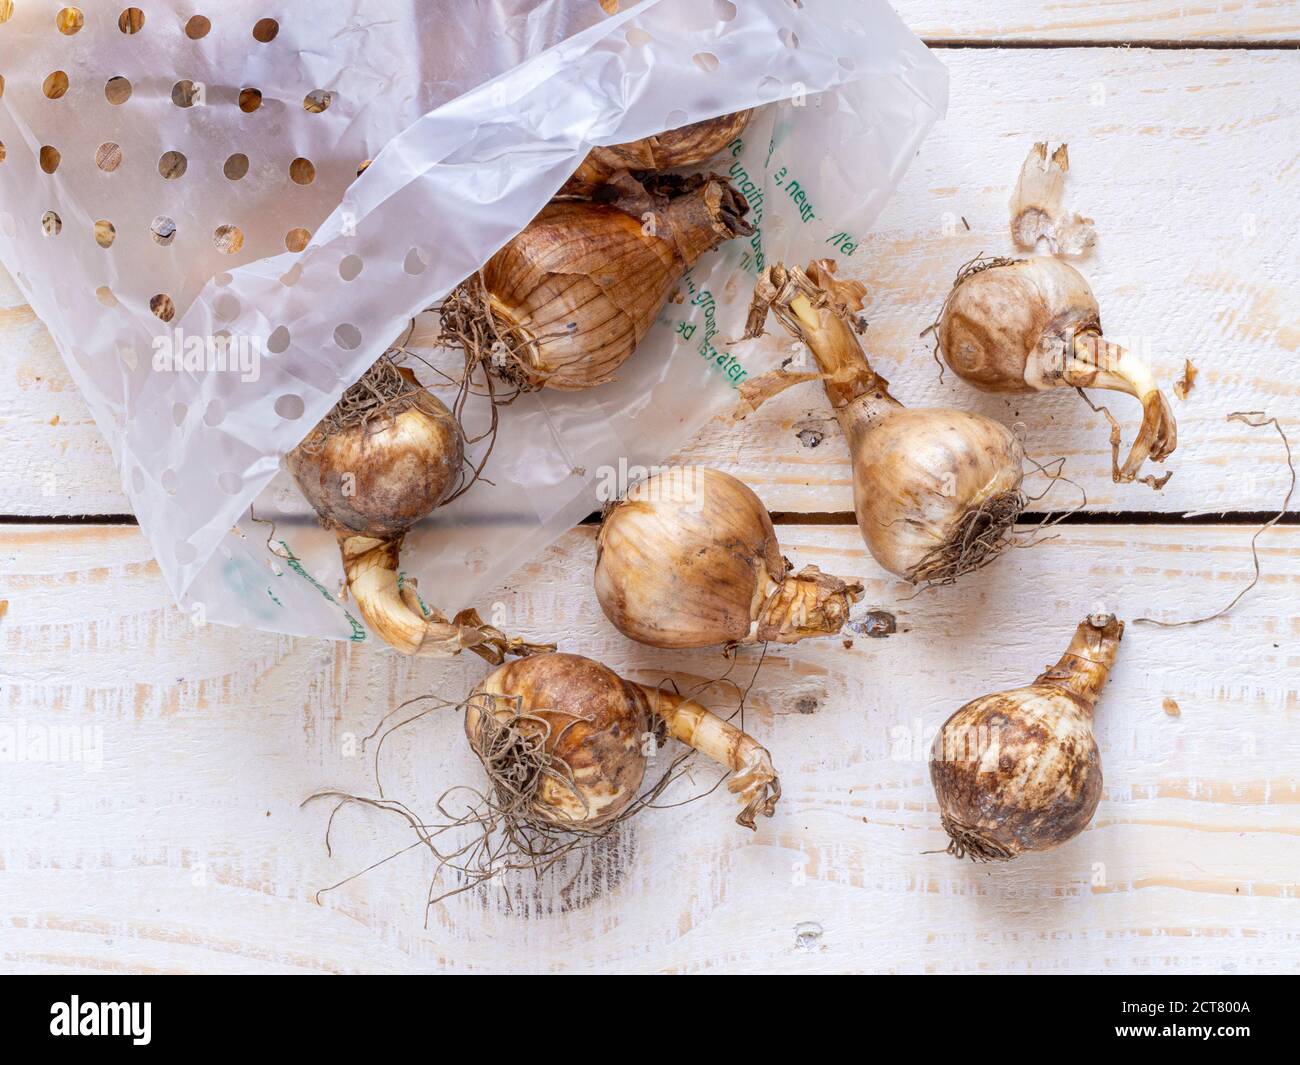 Retail pack of mixed daffodil bulbs ready for planting. Stock Photo